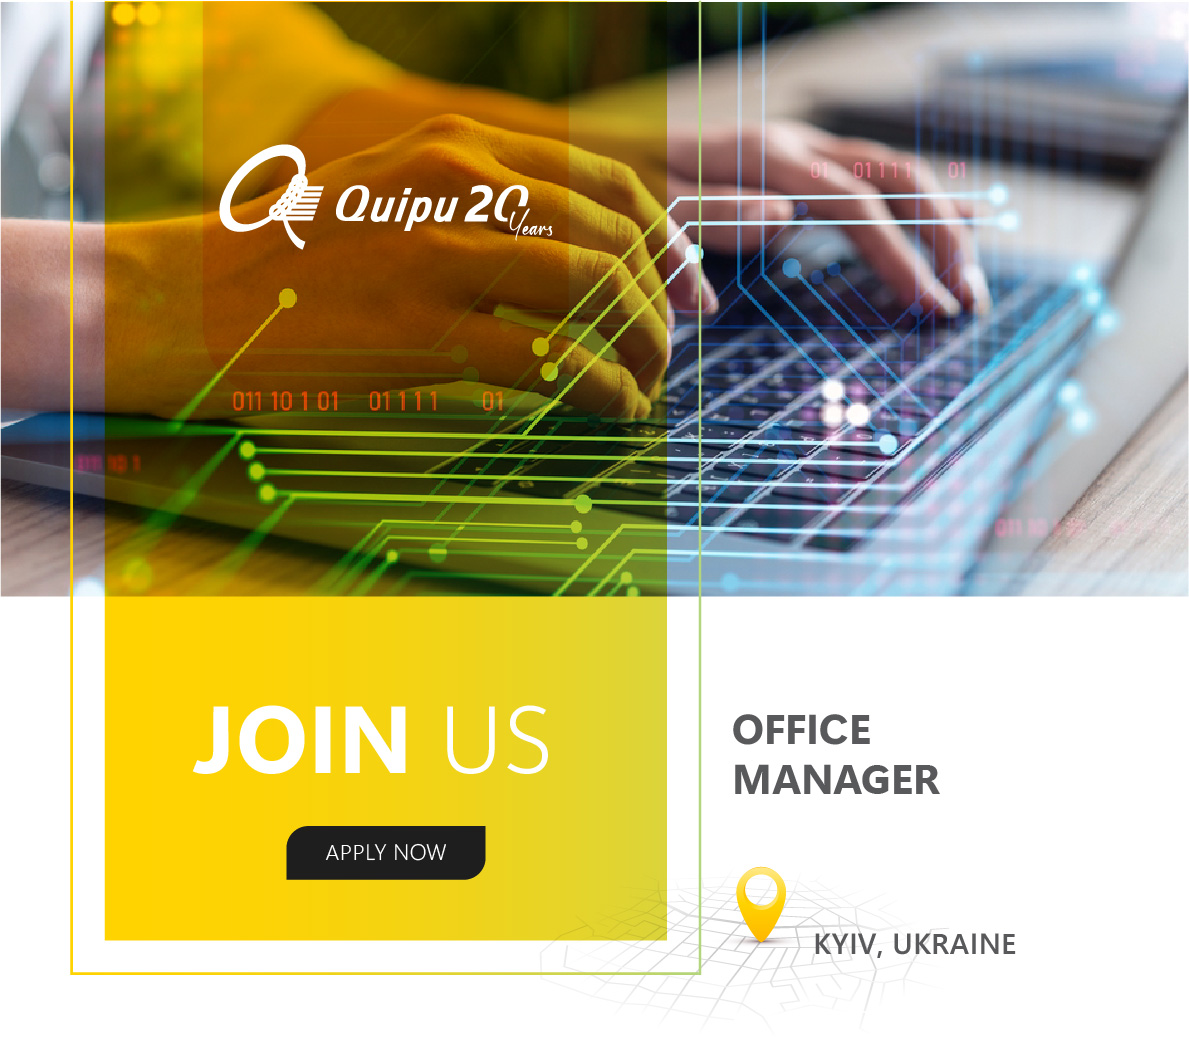 Office Manager – Kyiv